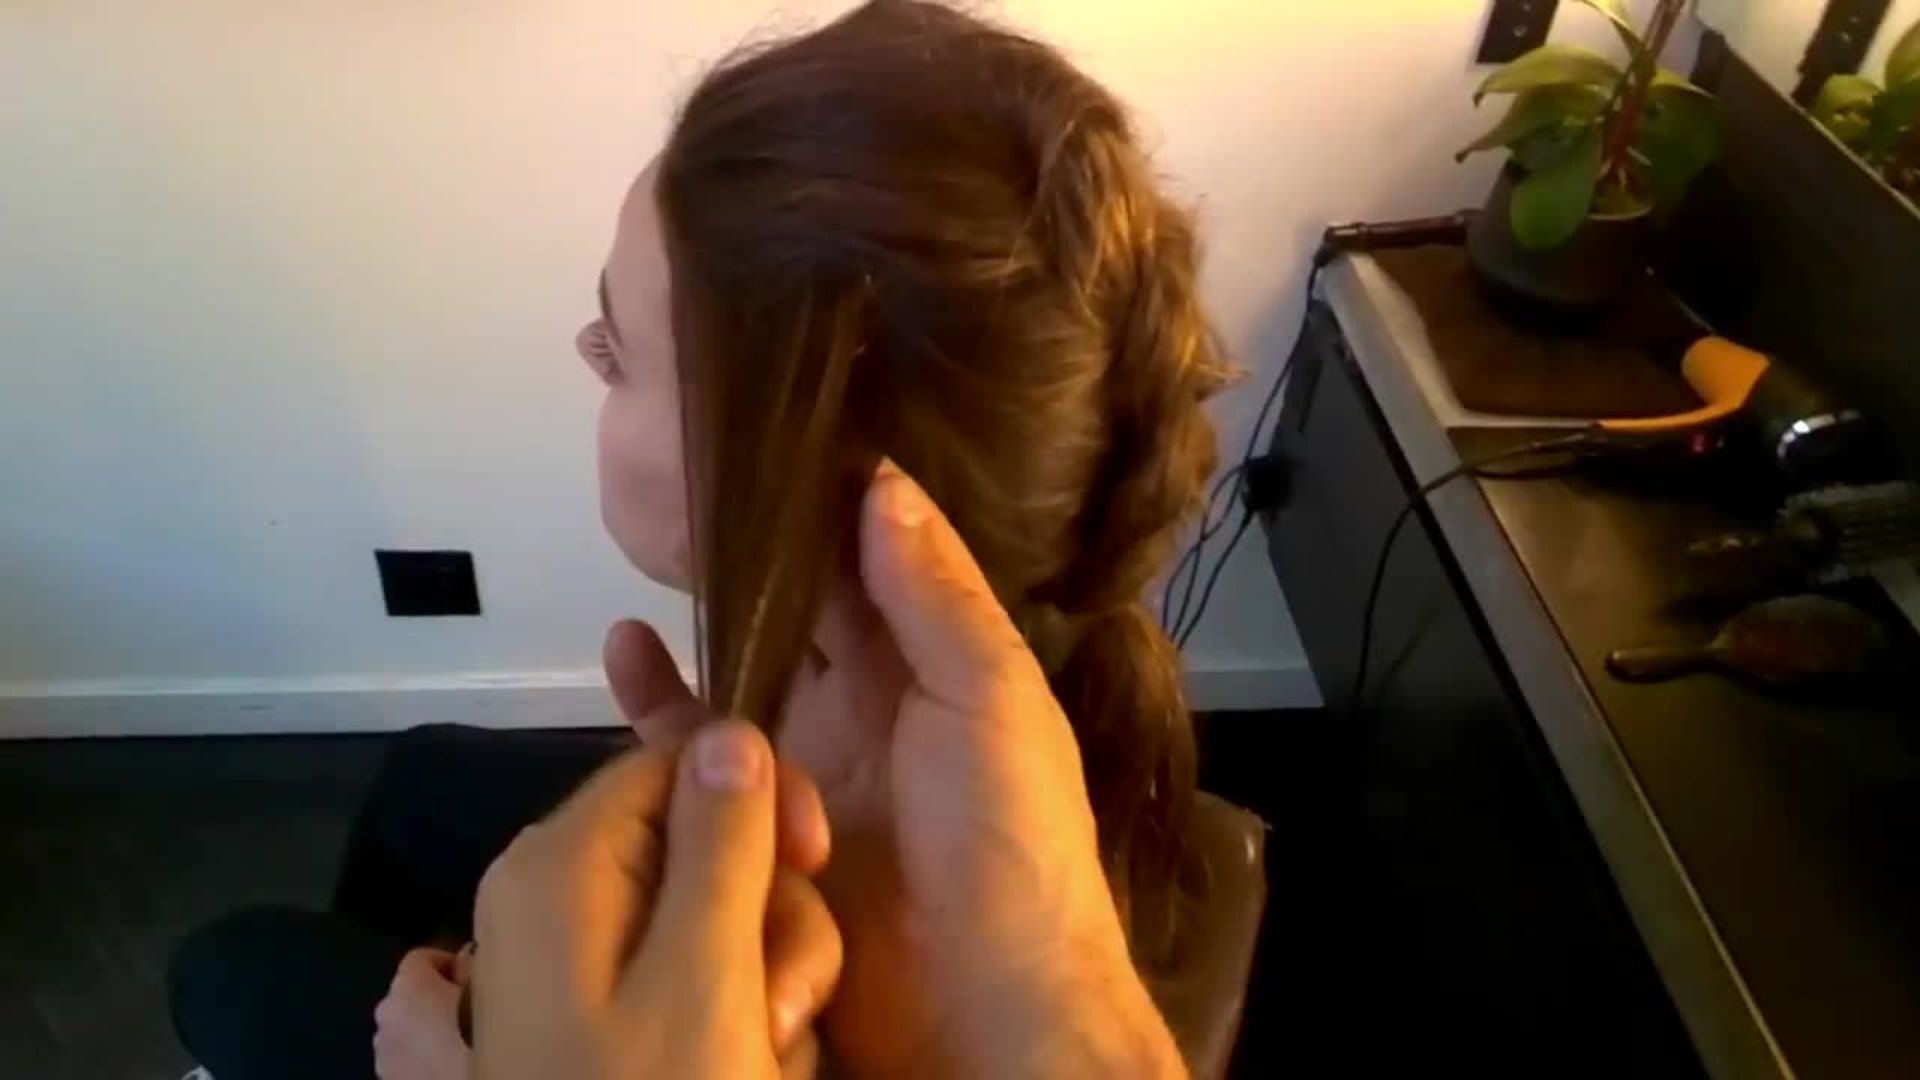 How to French Braid  Back to Basics 101 - Cute Girls Hairstyles